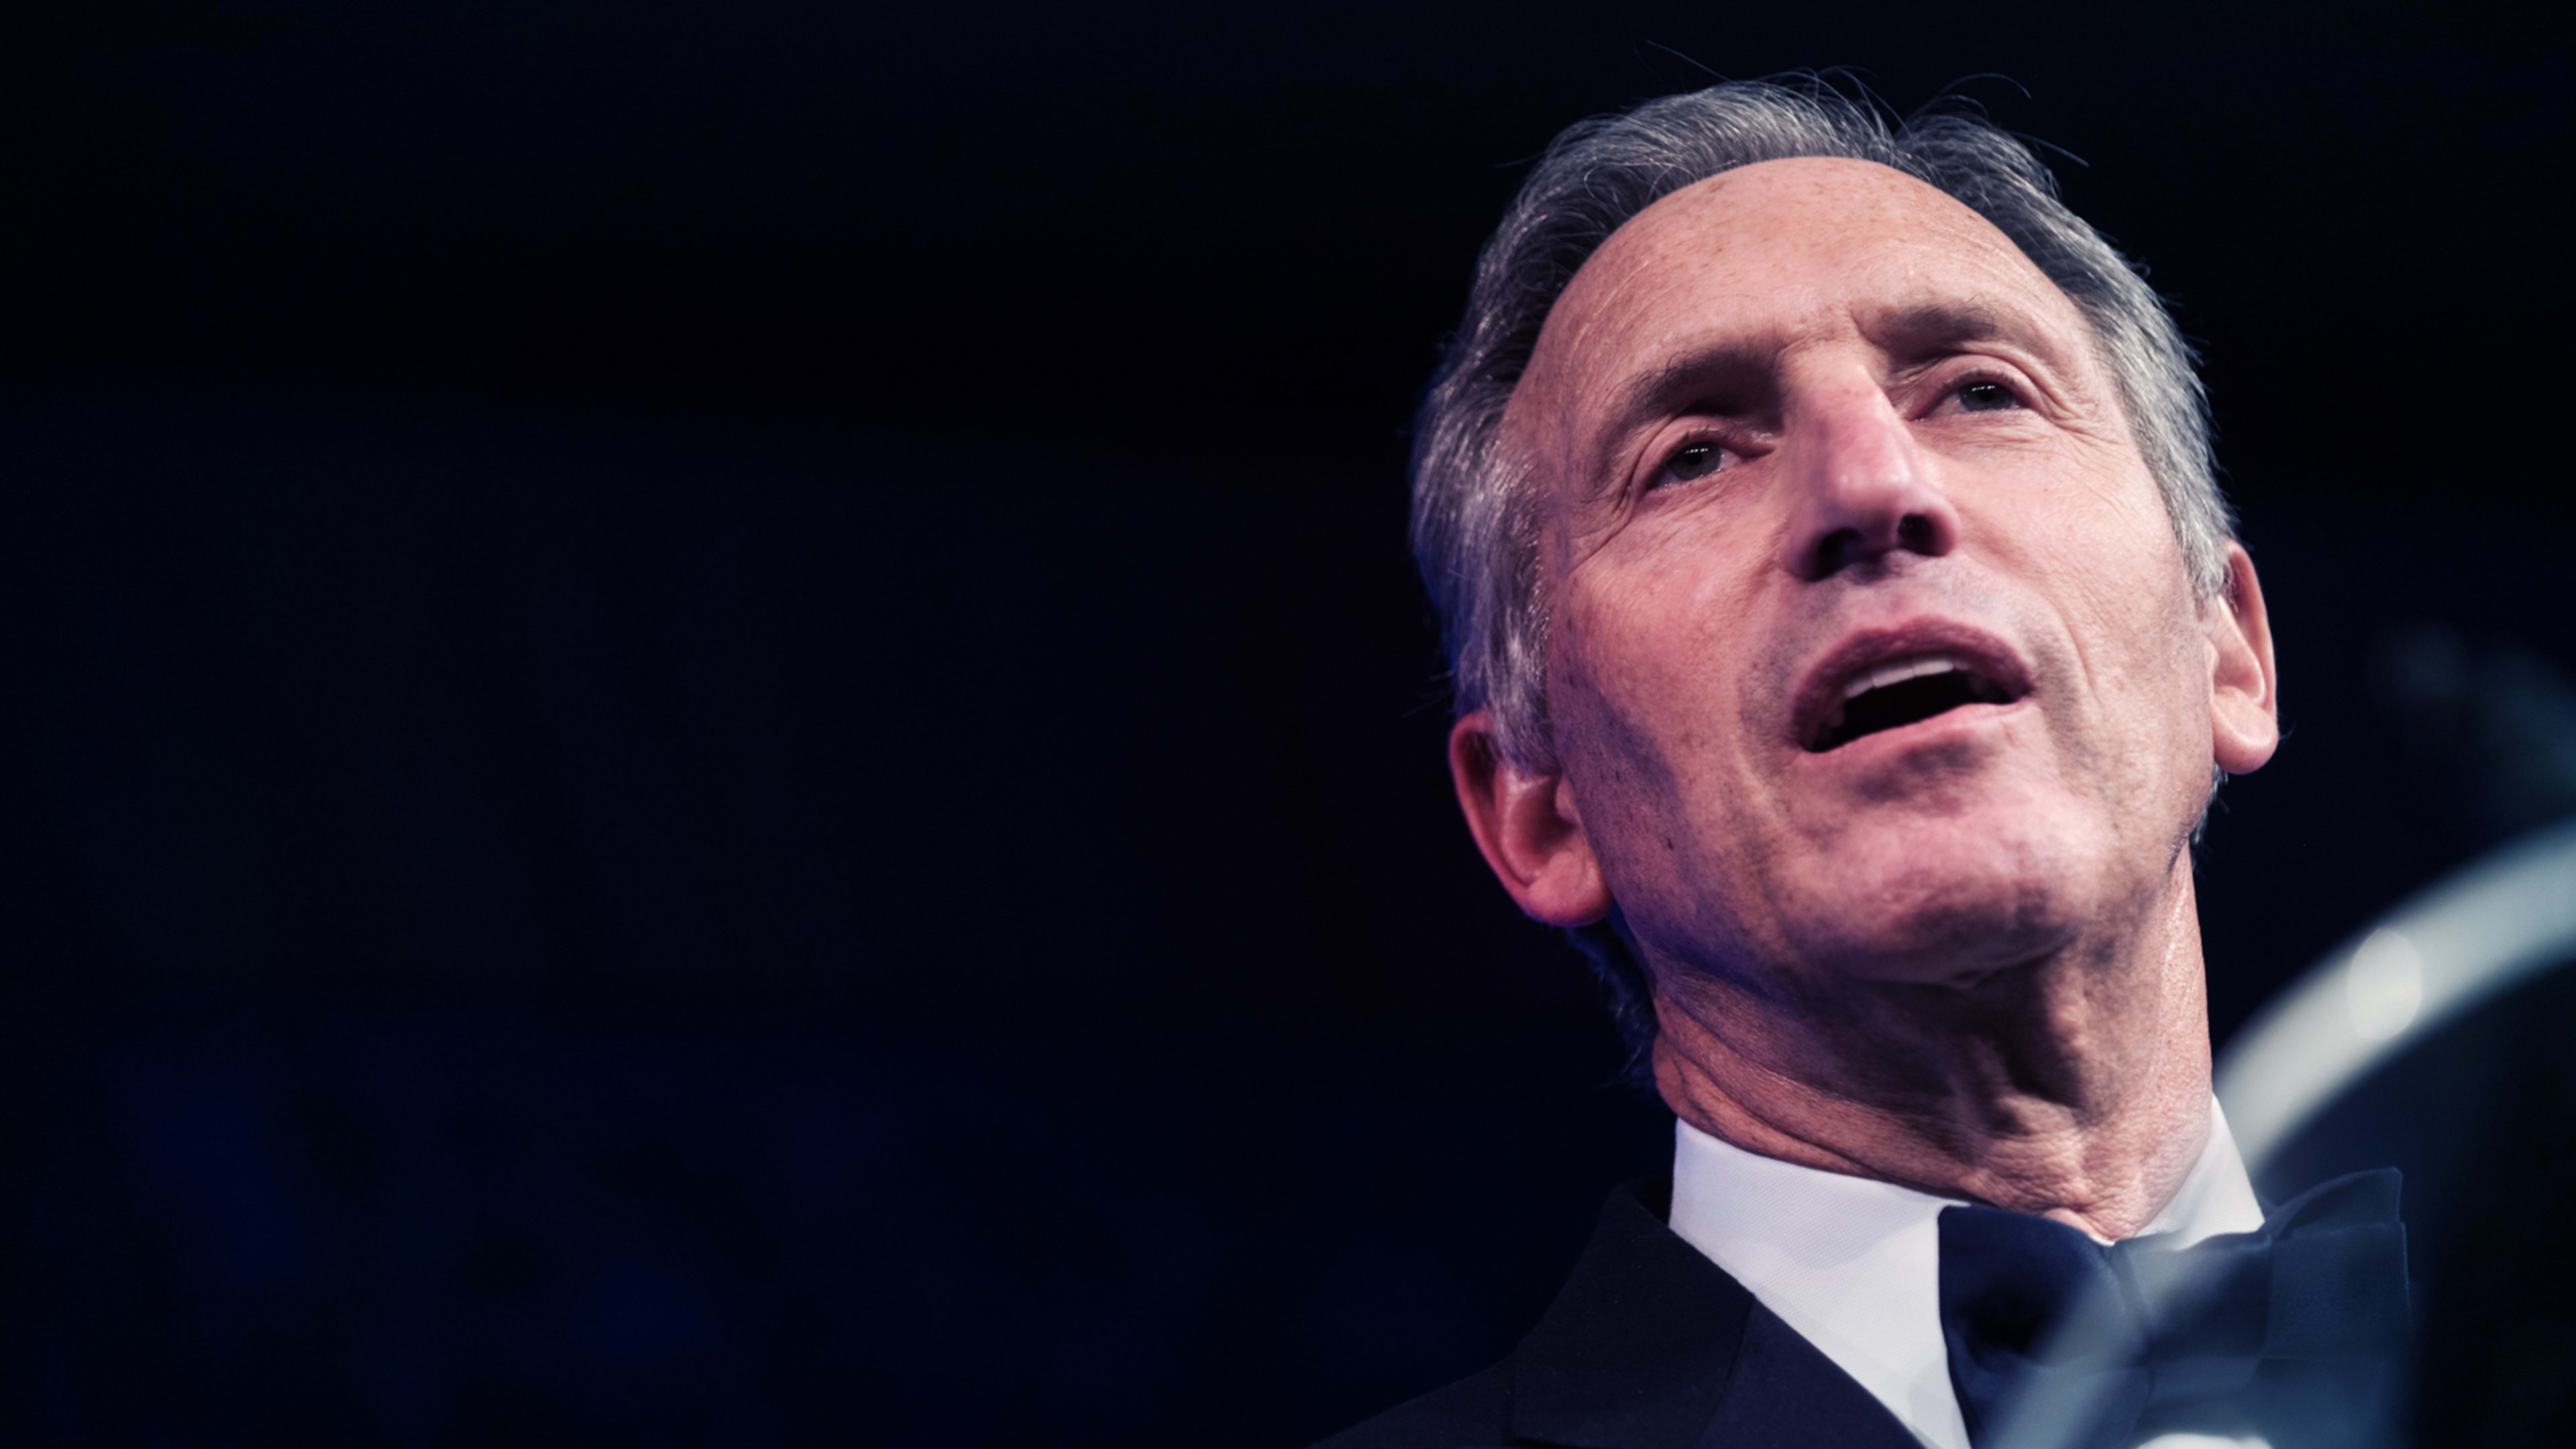 Howard Schultz claims Americans are getting bored with Trump’s tweets. Sadly, no